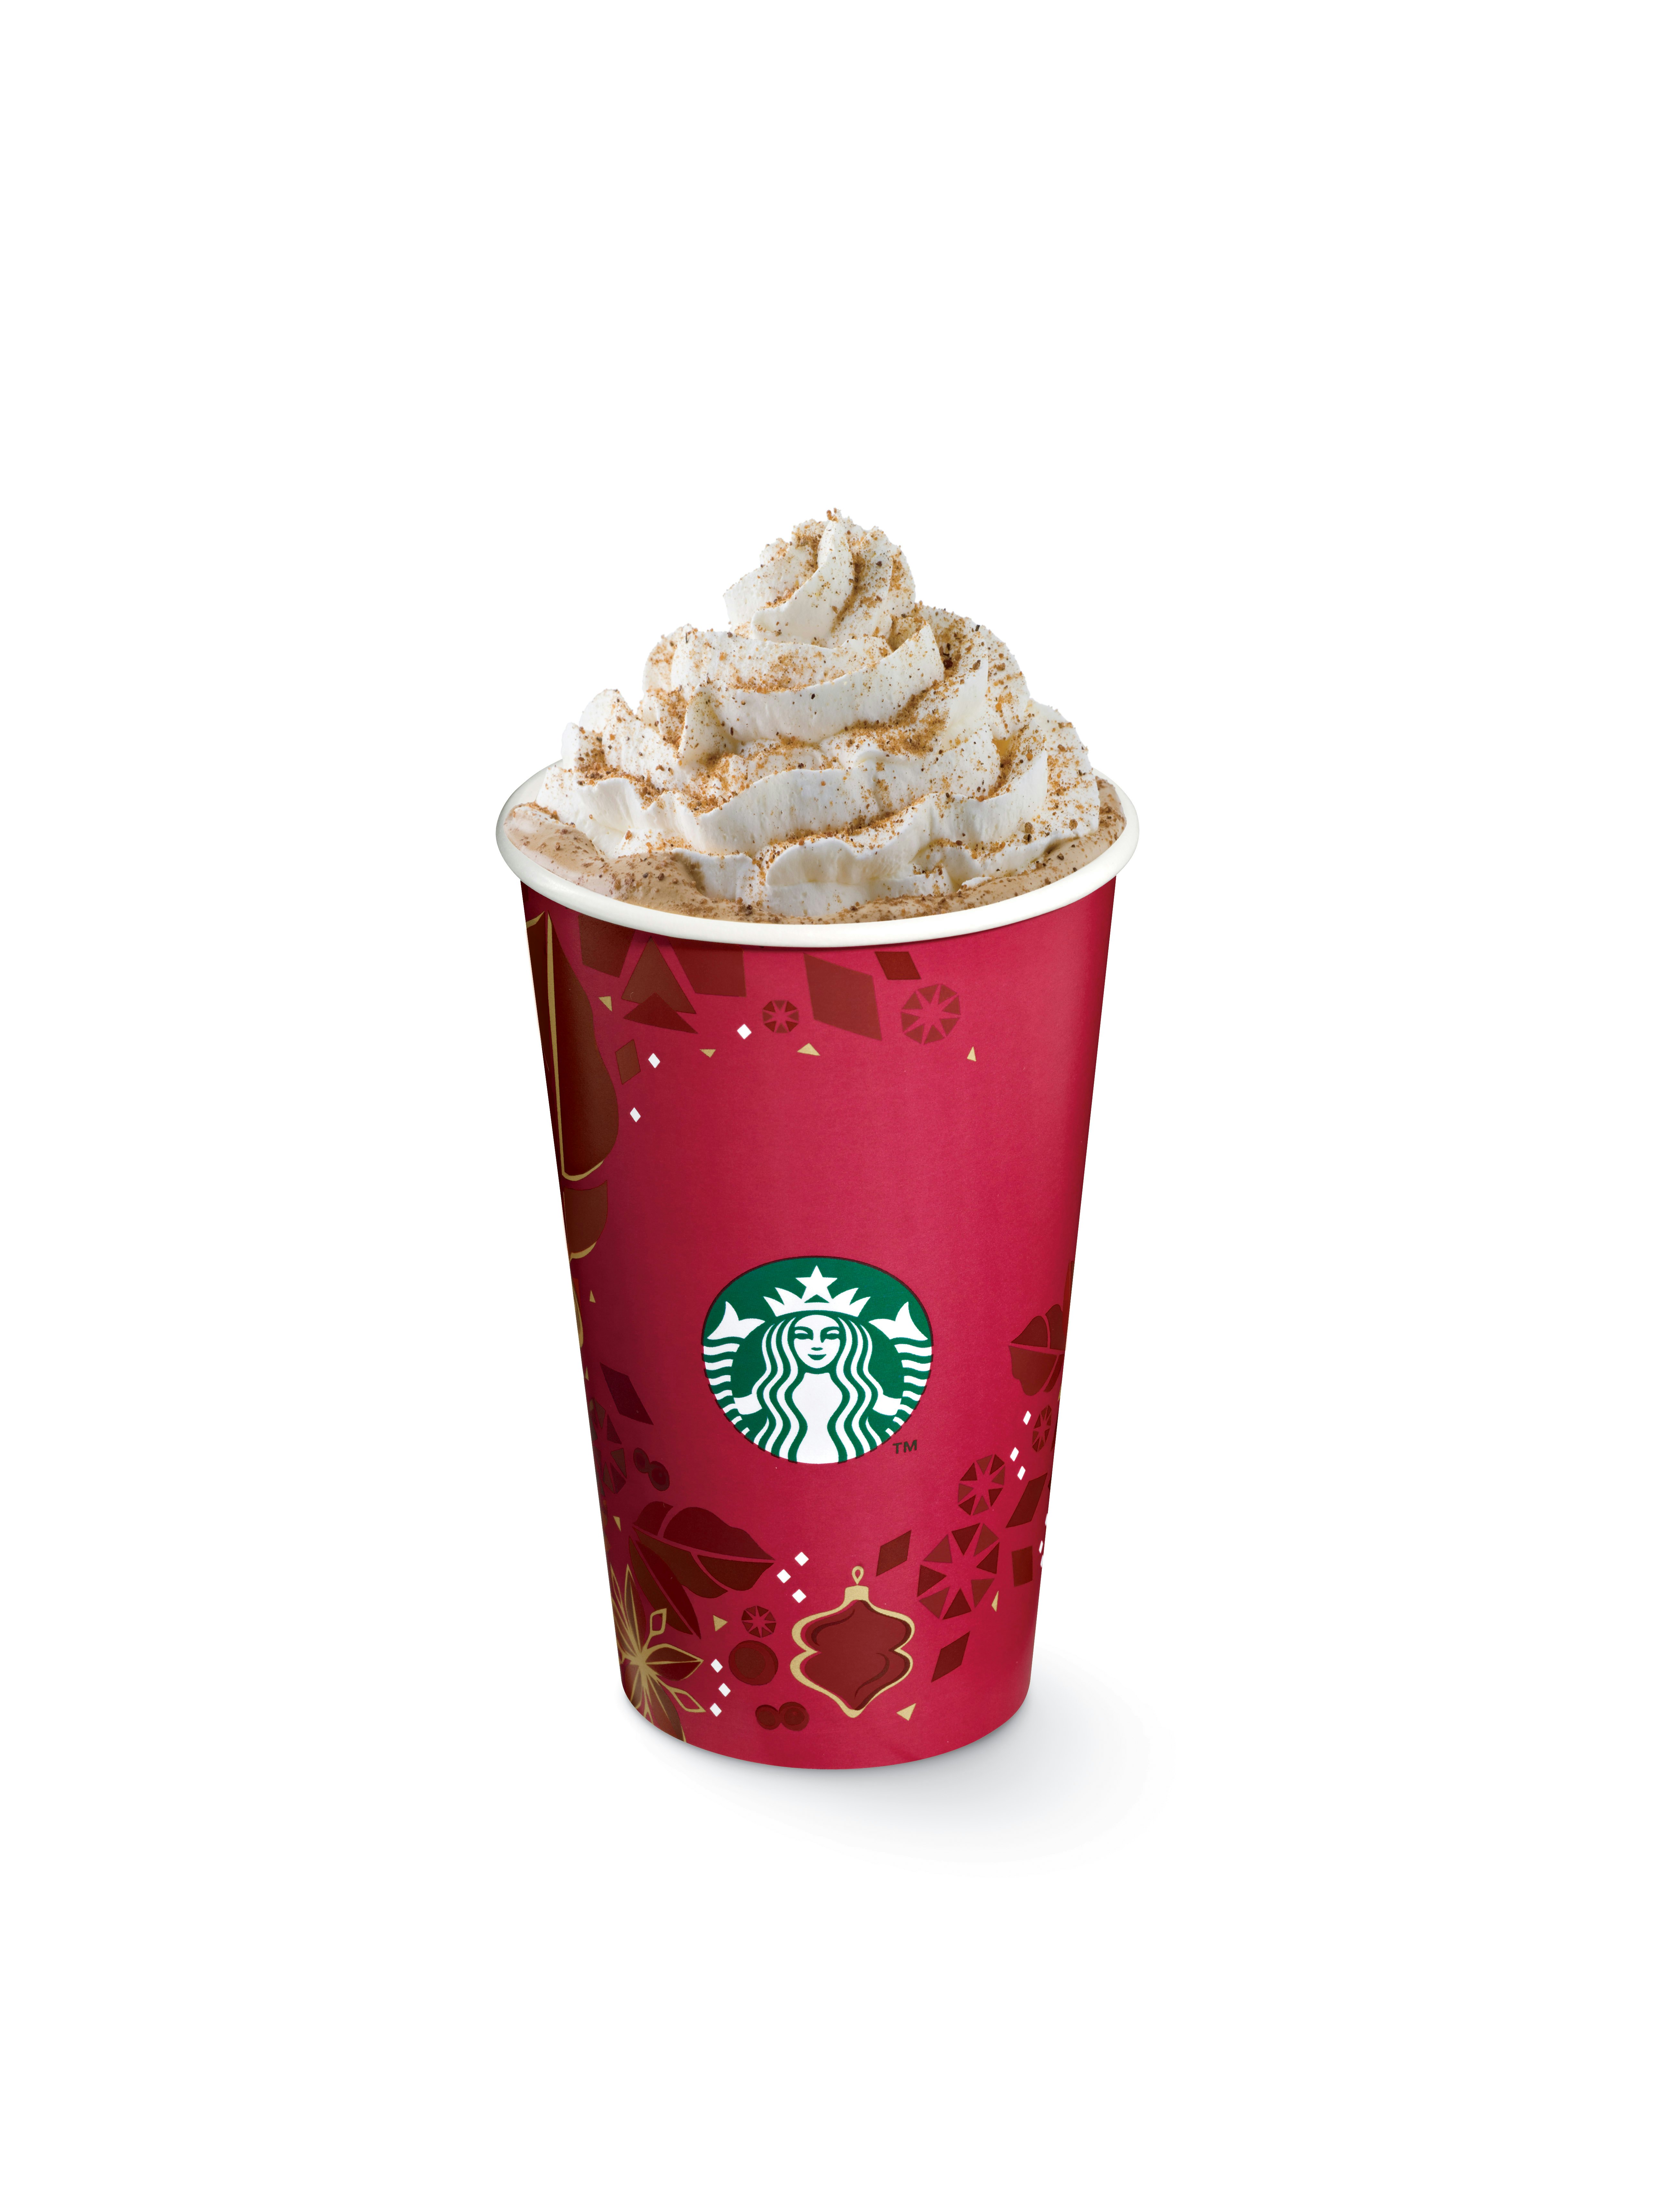 is-starbucks-gingerbread-latte-back-for-2019-there-s-a-catch